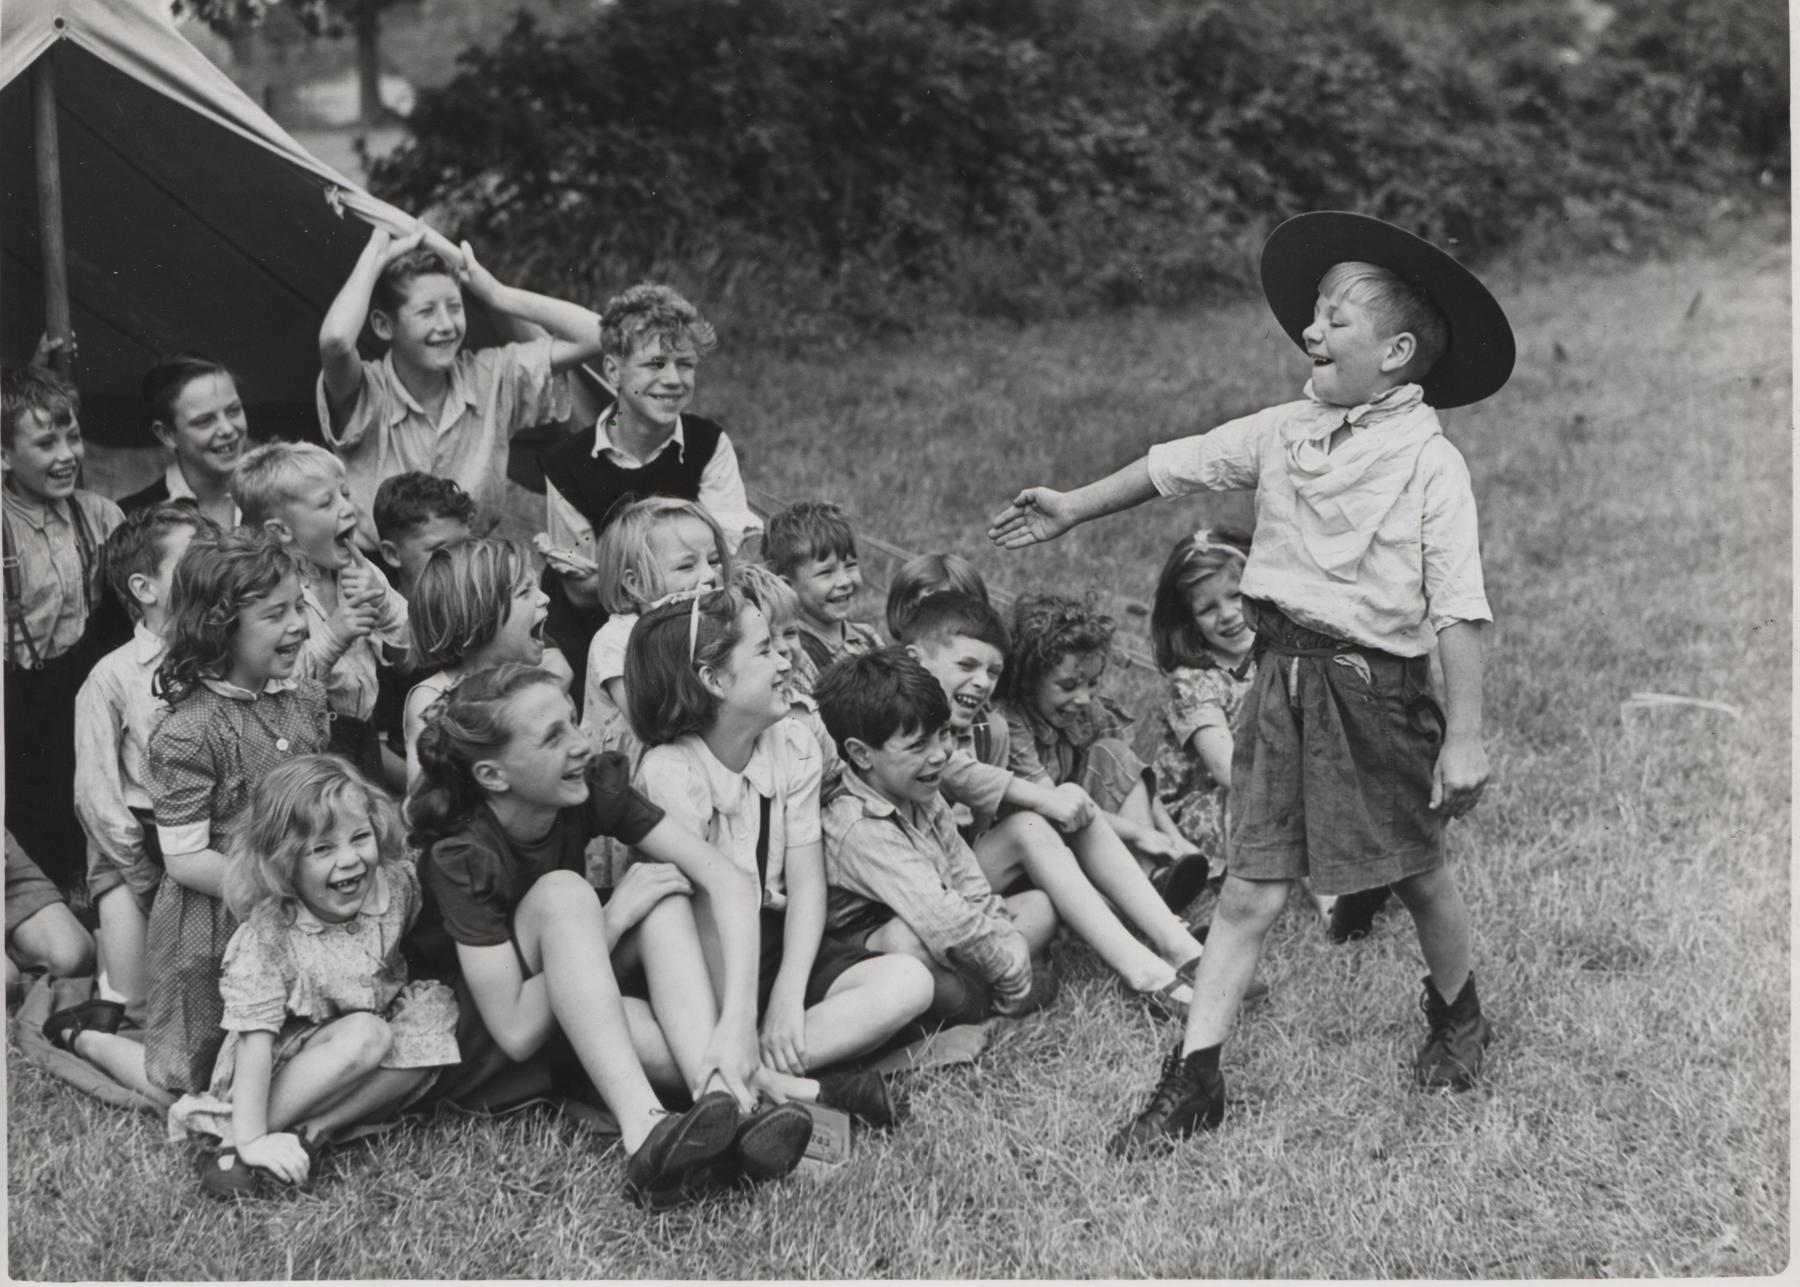 A group of young children sit on the grass in front of the tent. They are smiling and laughing as a young Scout boy is stood in front of them, playing and making them laugh.